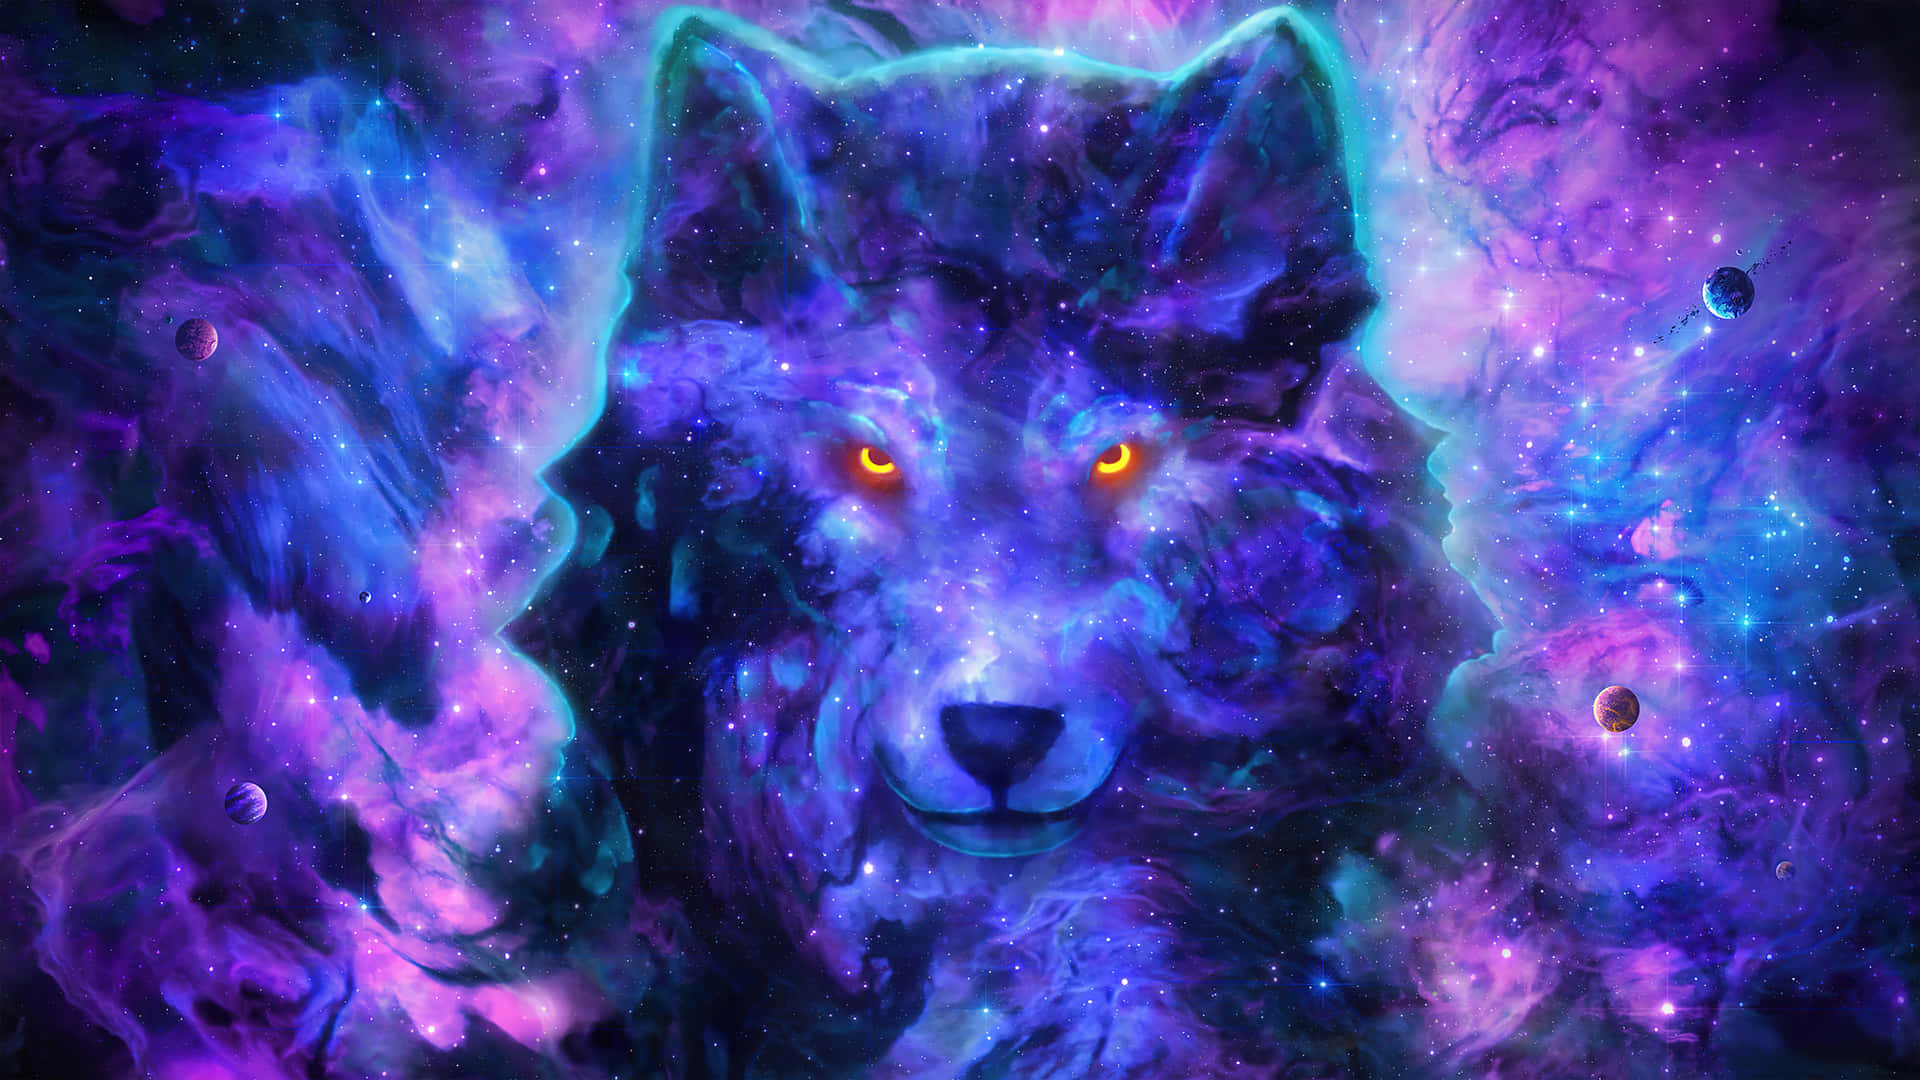 "A mysterious, magical galaxy wolf stares into the unknown depths of the stars."